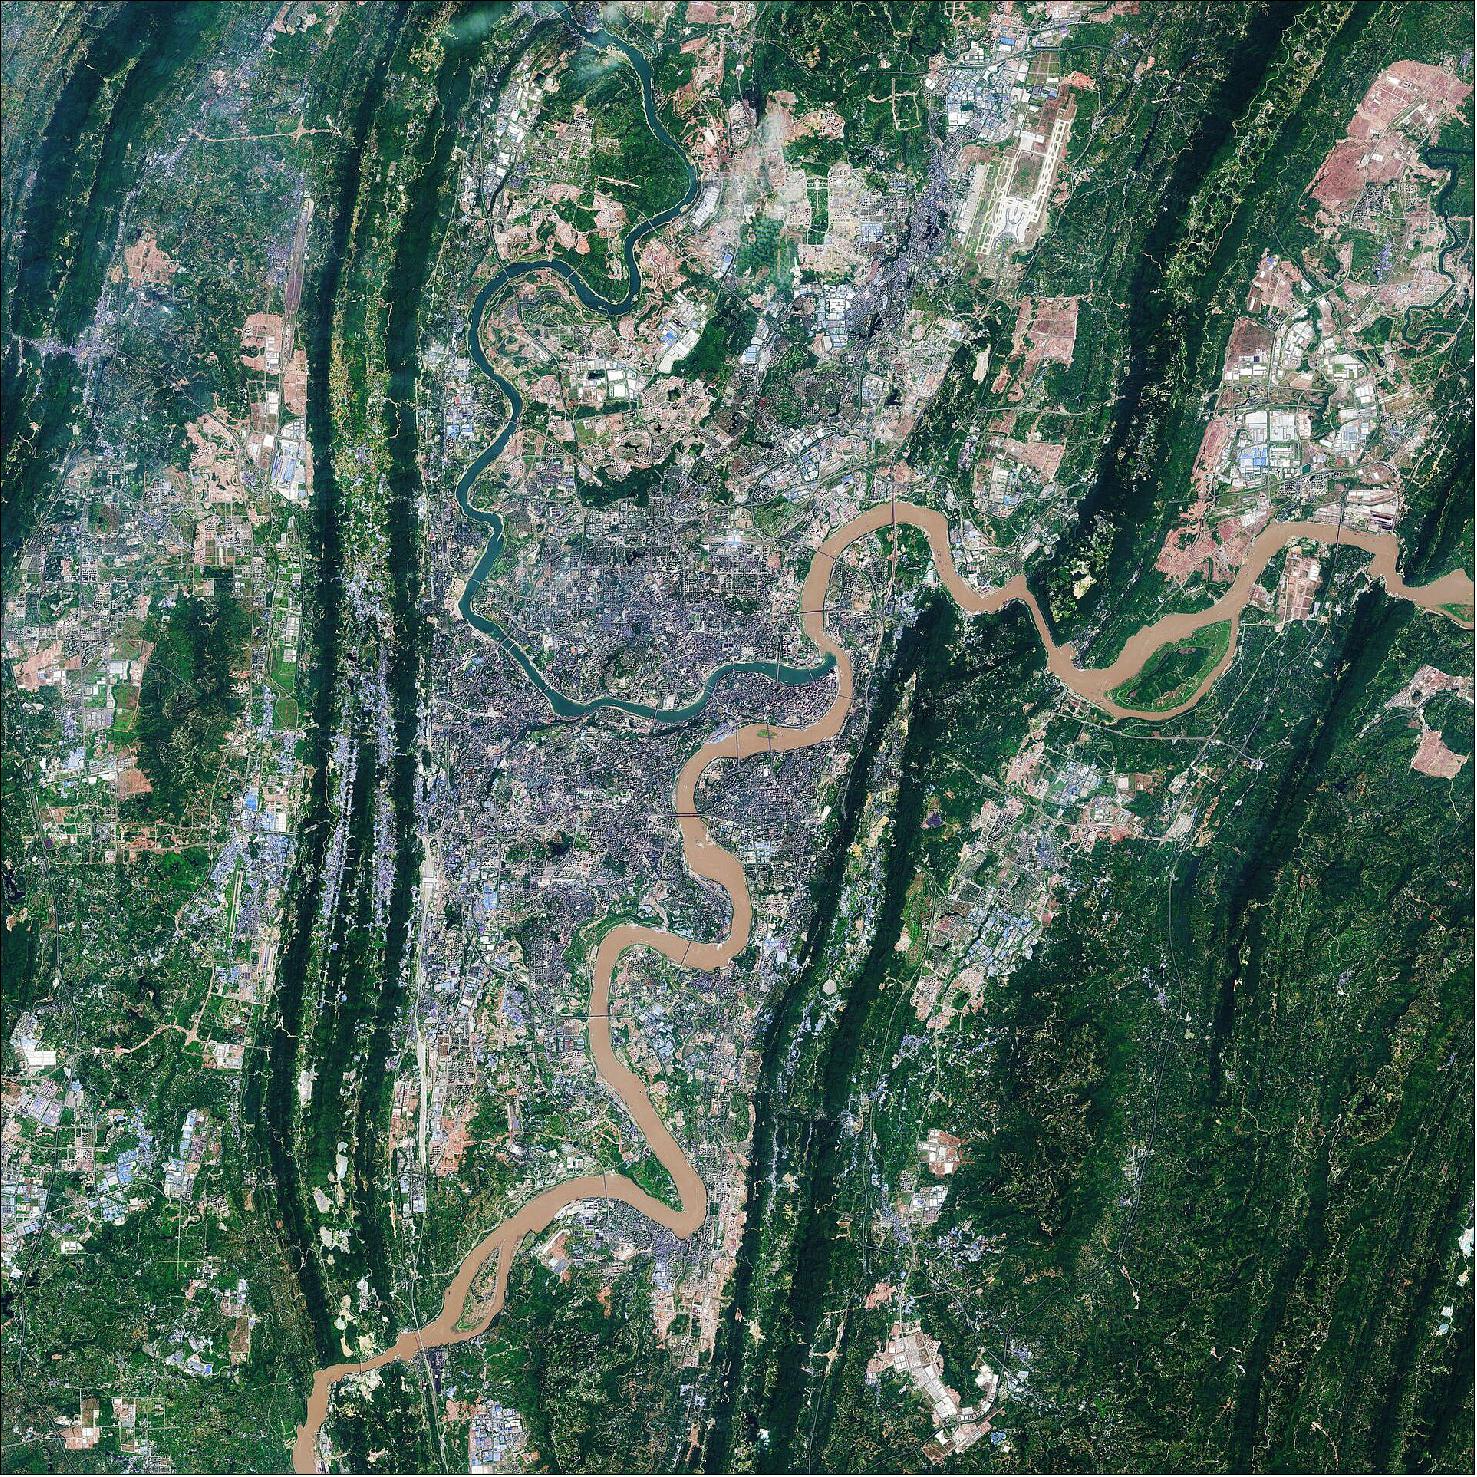 Figure 40: The city of Chongqing lies at the confluence of the Yangtze and Jialing rivers, where the clashing colors of the rivers meet. The Yangtze river is visible in brown in the right of the image, while the green waters of the Jialing can be seen in the left. The rivers make Chongqing China's biggest port city in the southwest region. With a length of 6300 km, the Yangtze is the longest river in both China and Asia and the third longest river in the world. The Jialing River, rises in the Qin Mountains, and joins the Yangtze after a course of around 1190 km. This image is also featured on the Earth from Space video program (image credit: ESA, the image contains modified Copernicus Sentinel data (2018), processed by ESA, CC BY-SA 3.0 IGO)